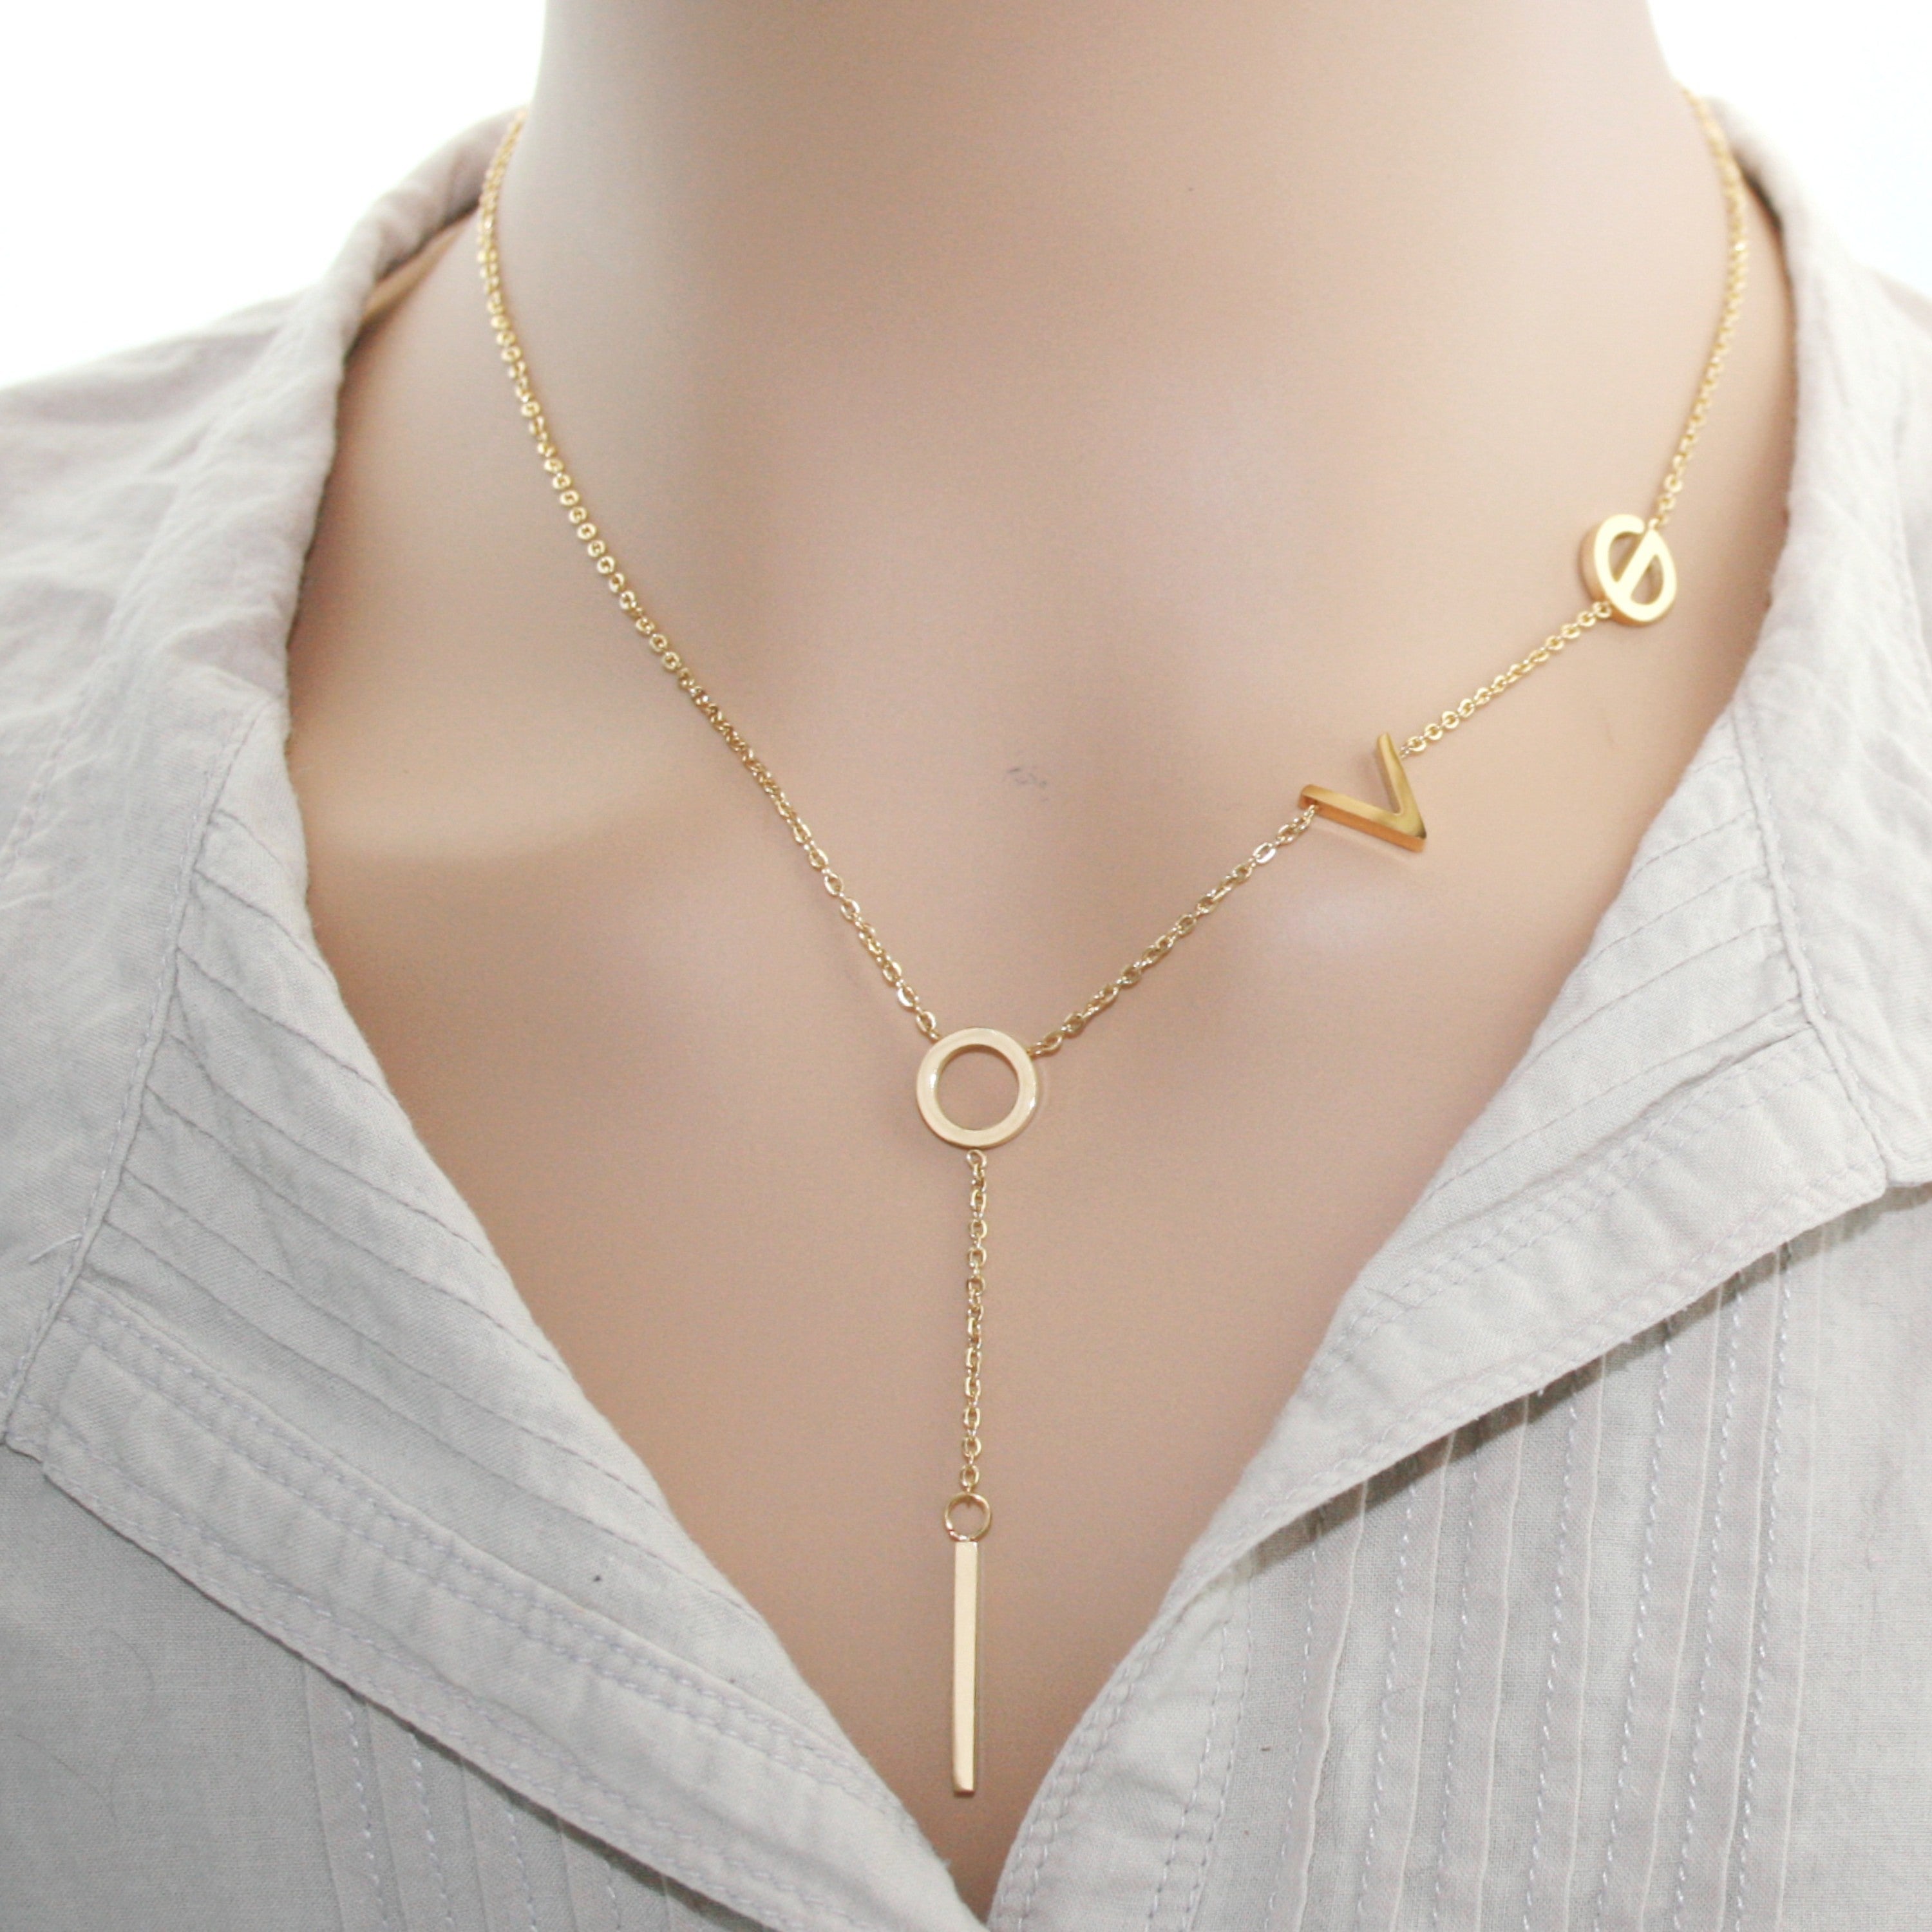 Stainless Steel  Gold Tone Lariat Style Bar Necklace